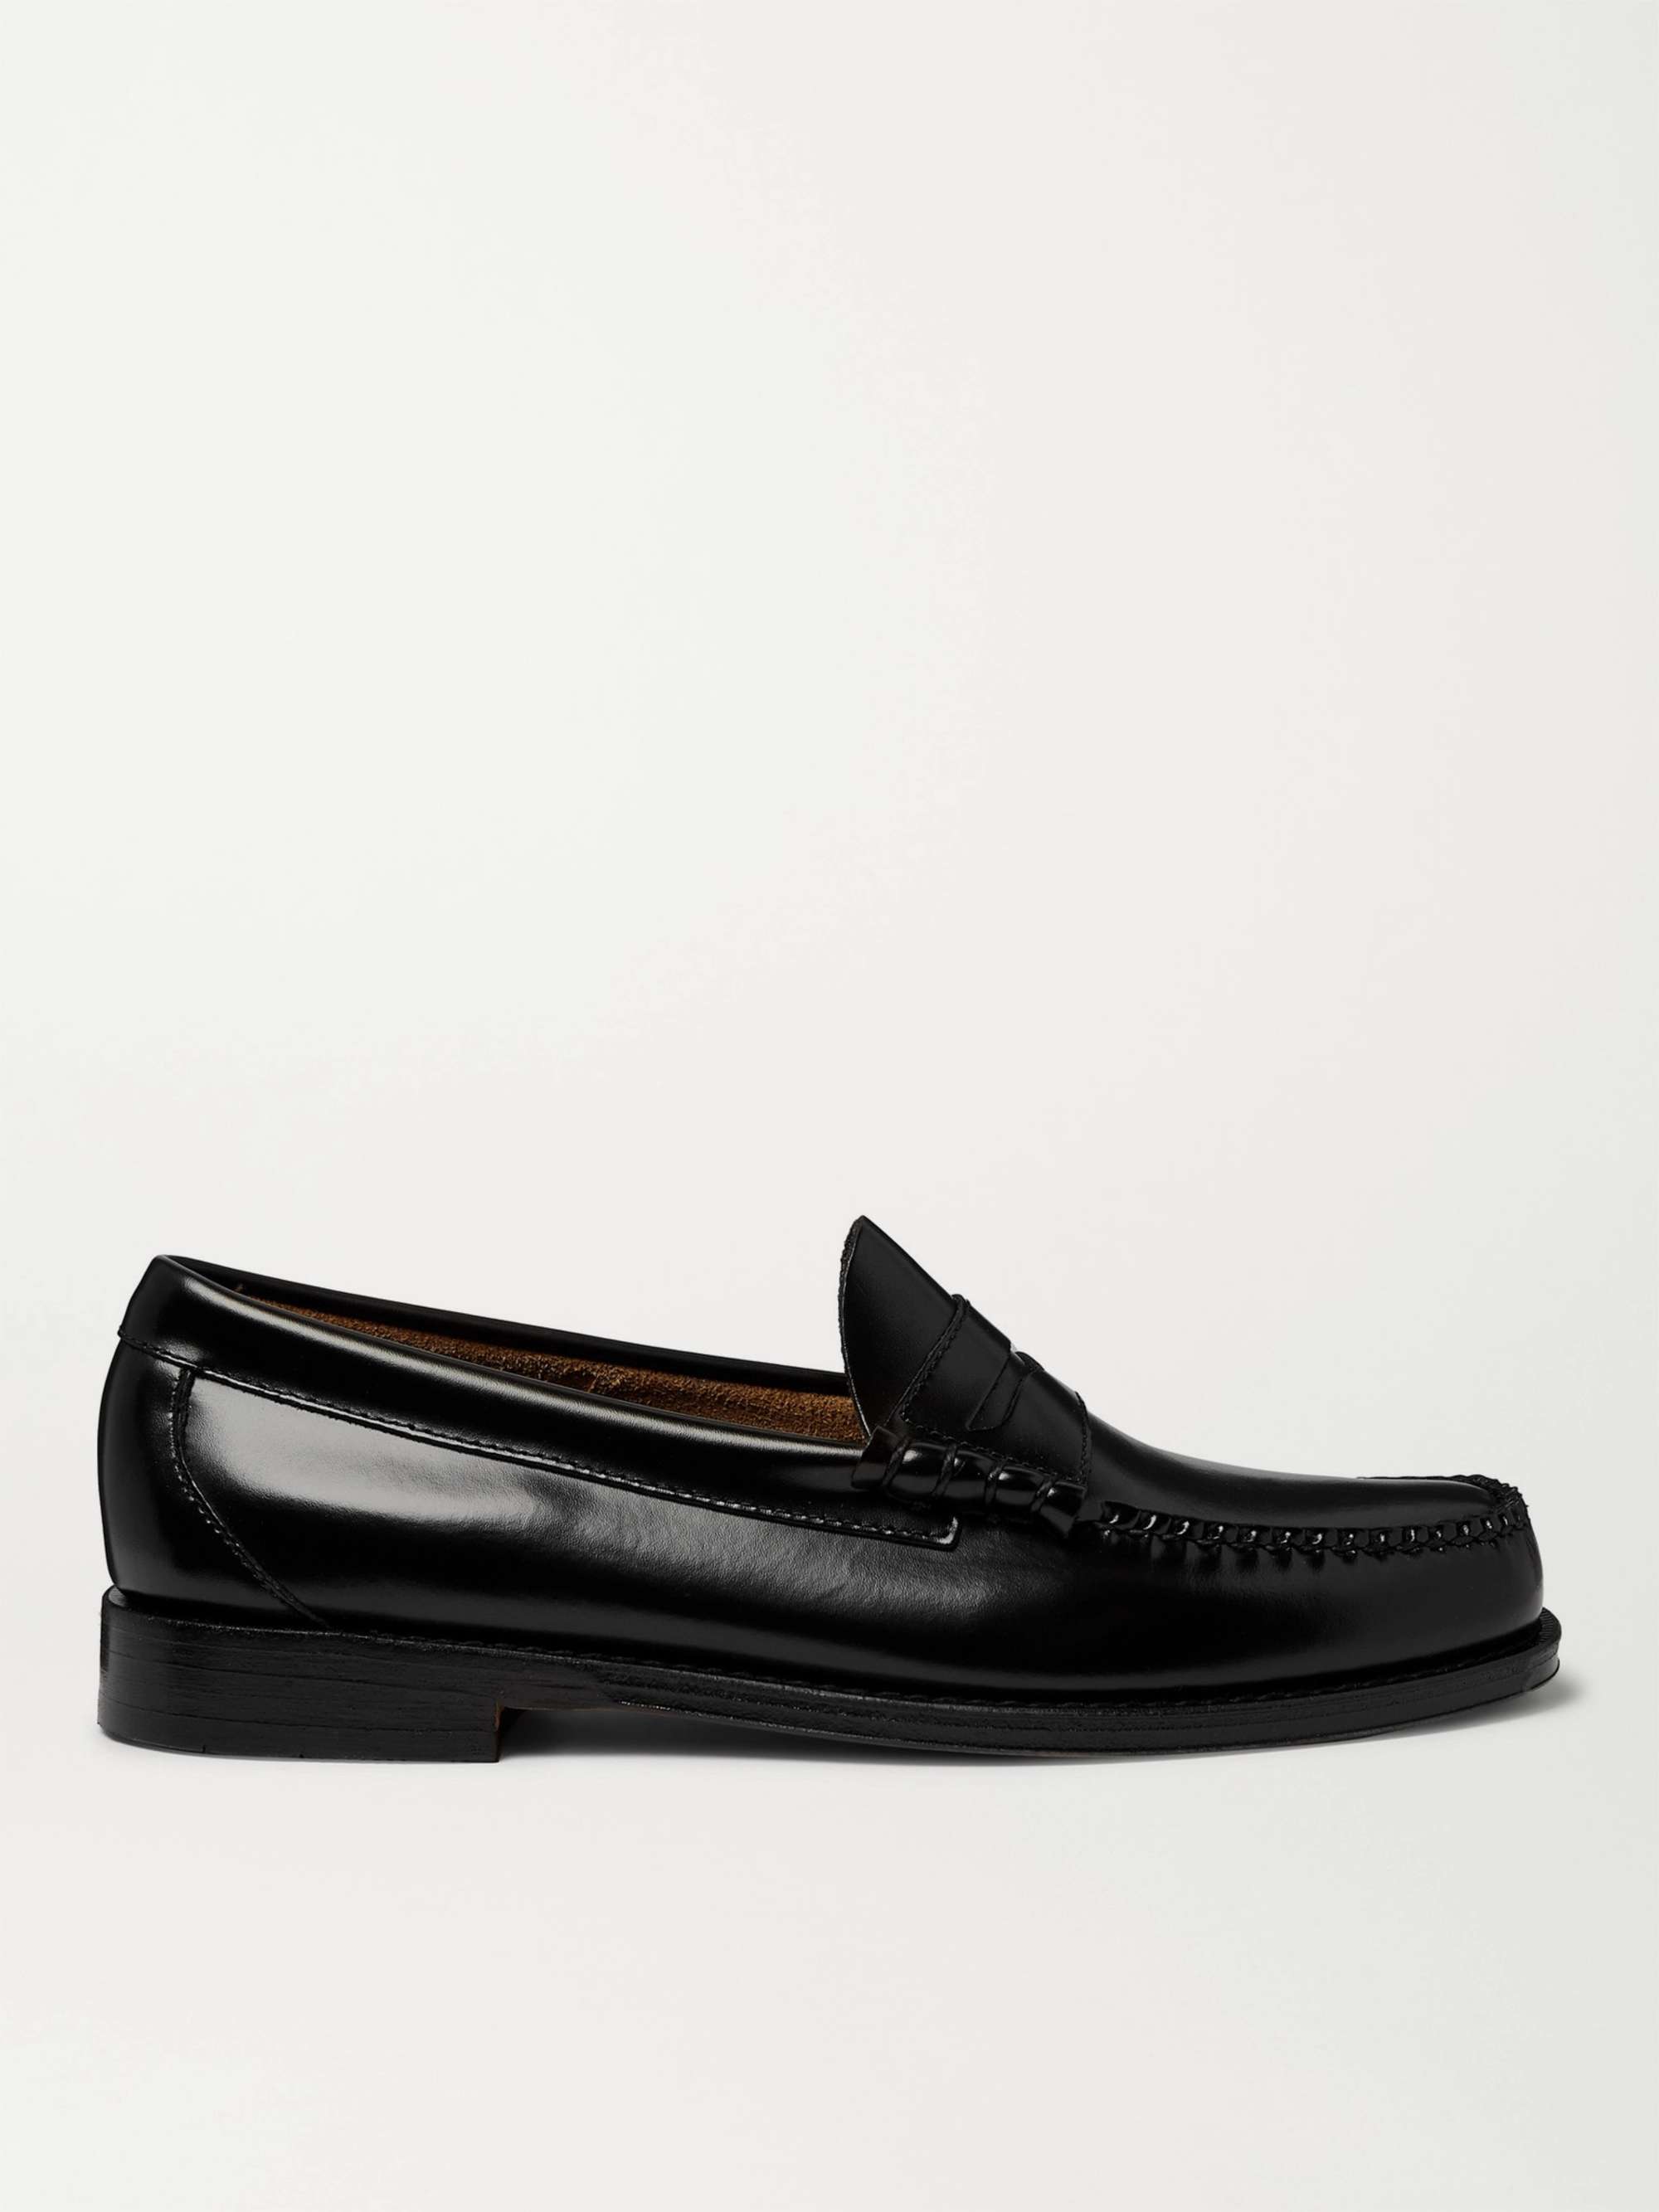 Black Weejuns Heritage Larson Leather Penny Loafers | G.H. BASS & CO. | MR  PORTER